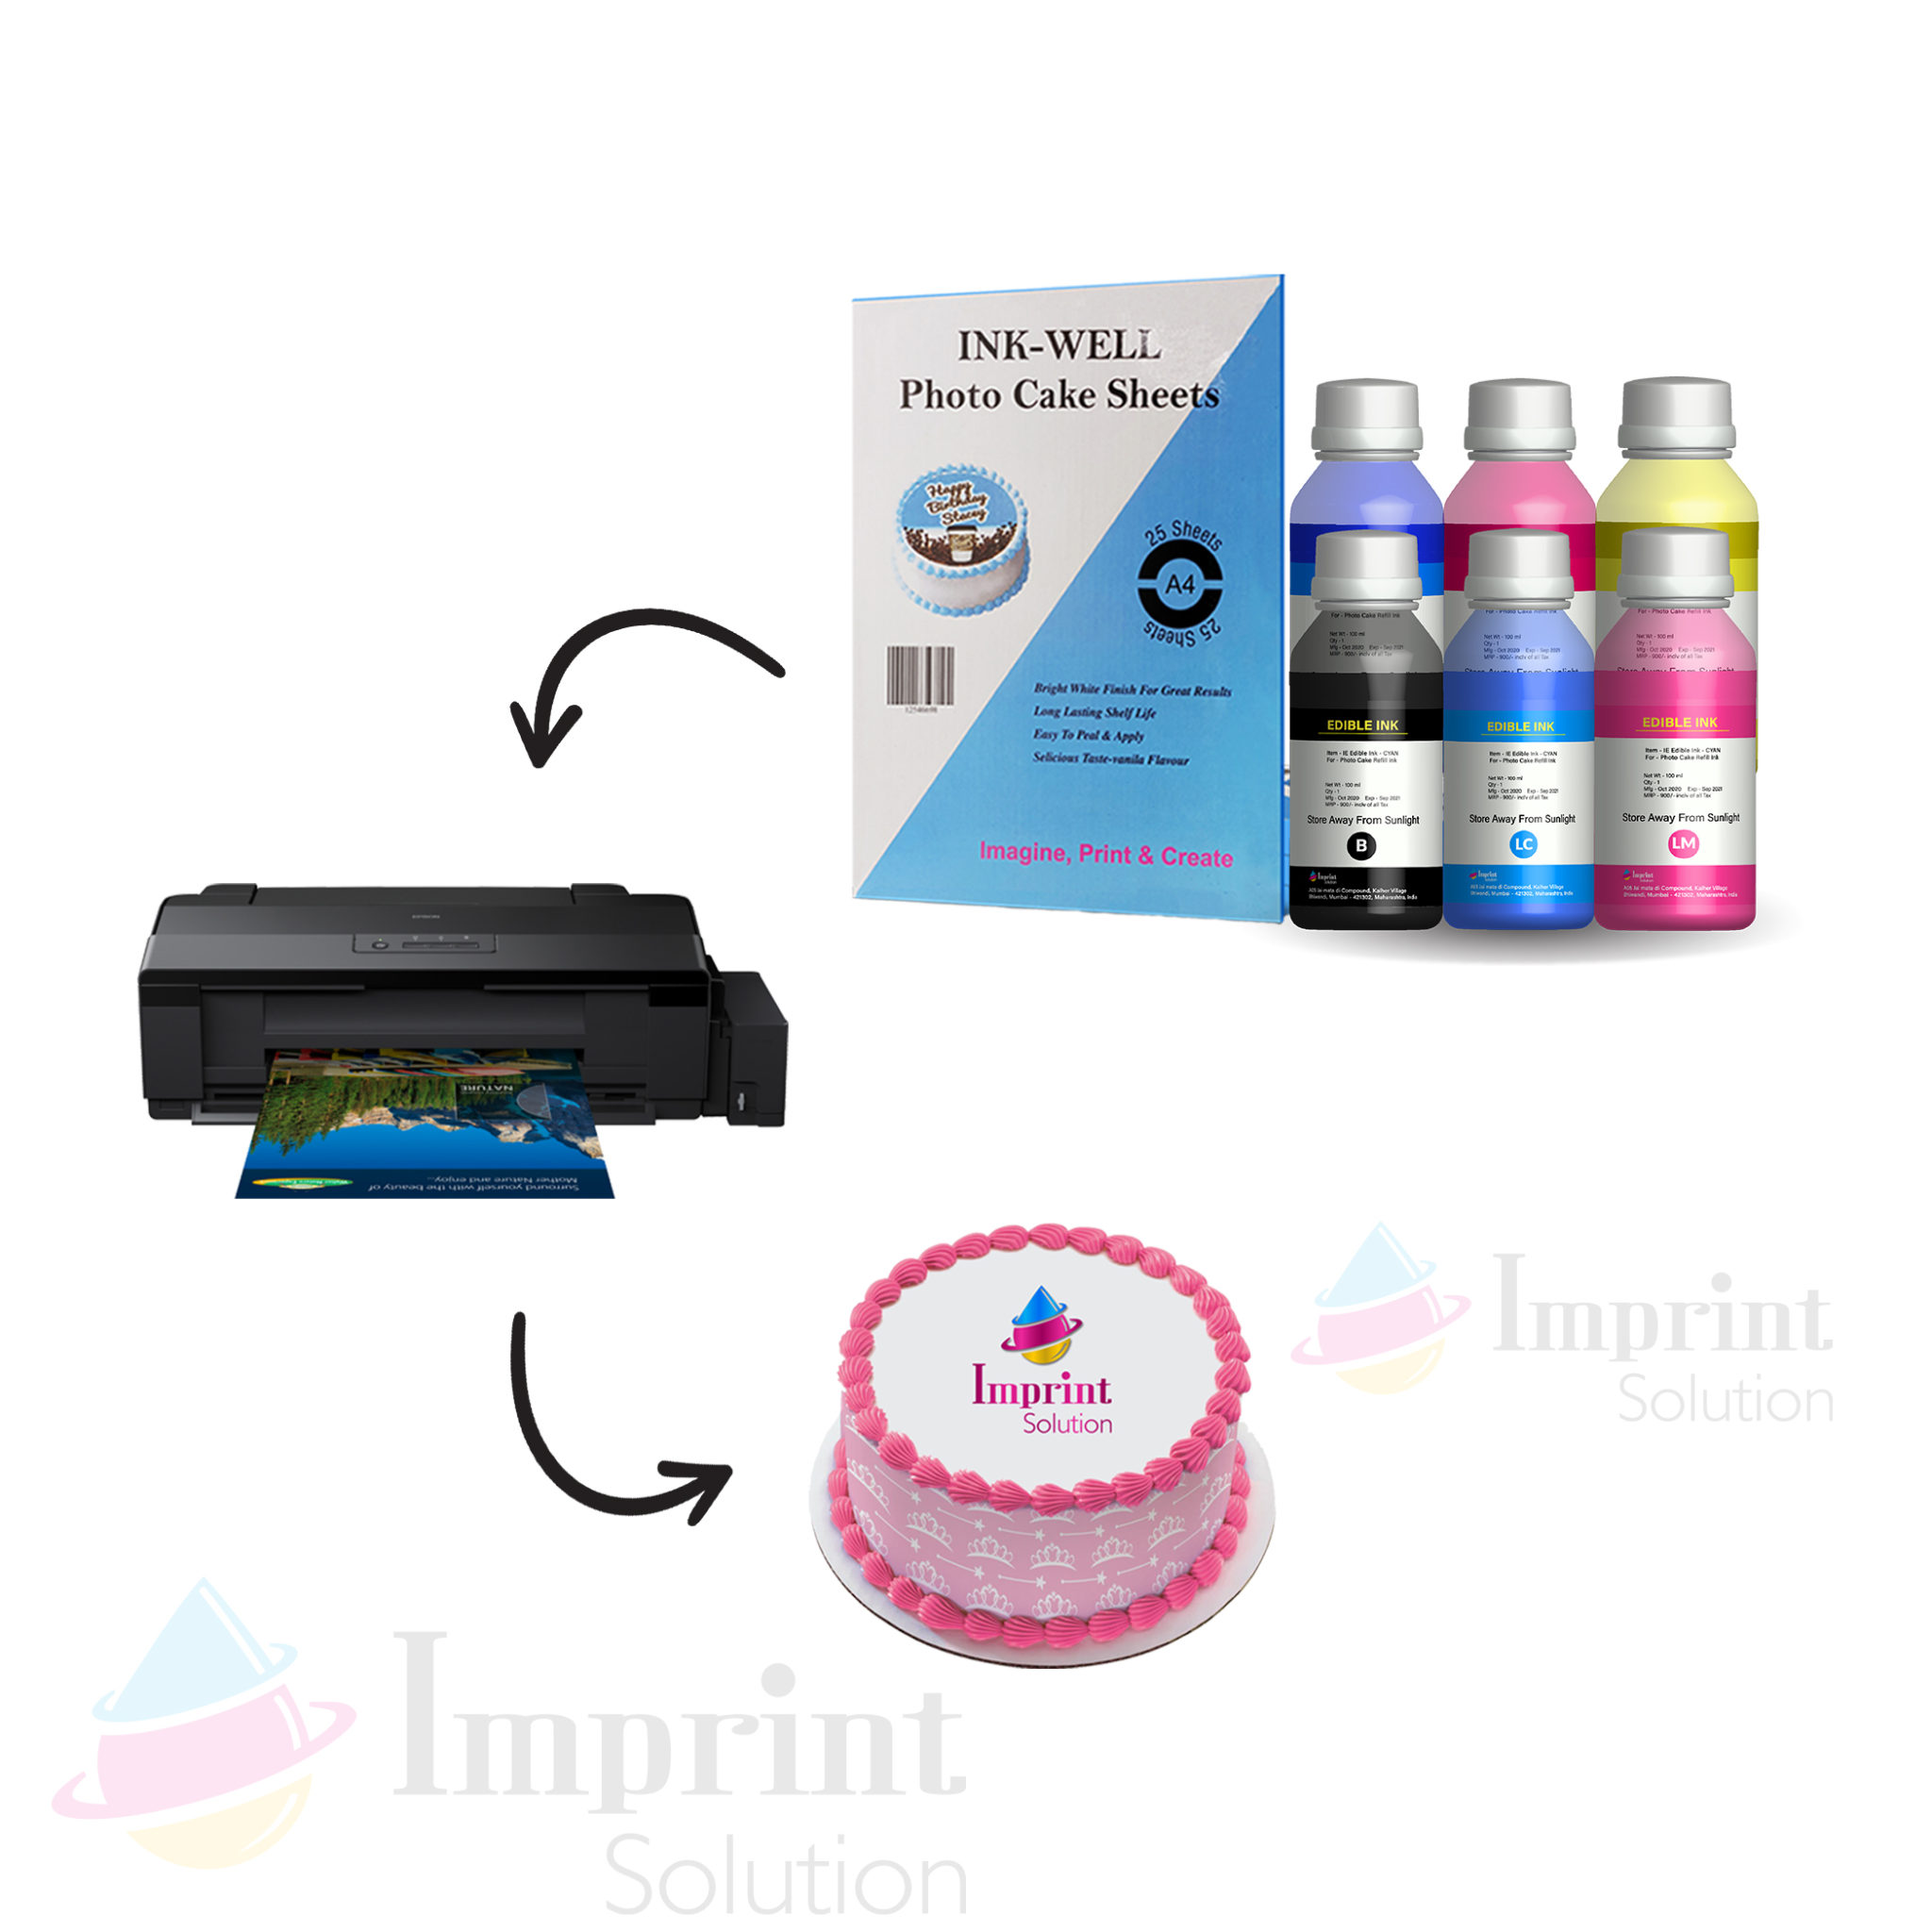 Edible setup 1800 IMPRINT SOLUTION We Imprint Solution Dealing With Printers, Inks, Papers https://imprintsolution.co.in/wp-content/uploads/2021/02/cropped-Imprint-logo-01-1.png